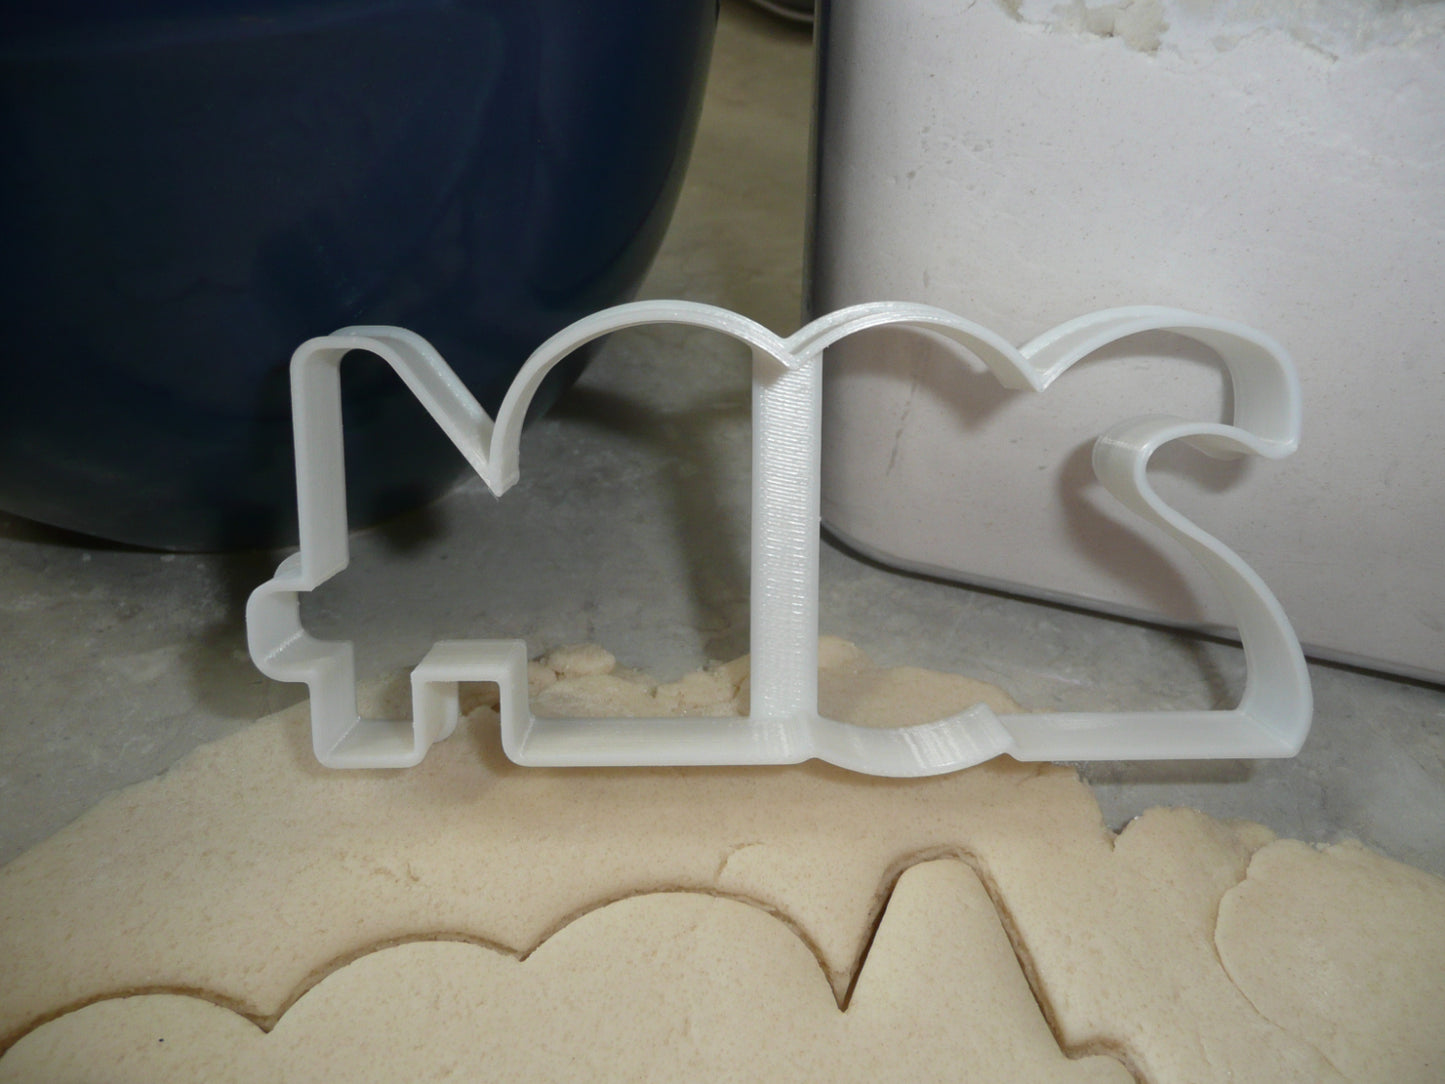 2024 Cookie Cutter New Years Cookie Cutters Graduation 